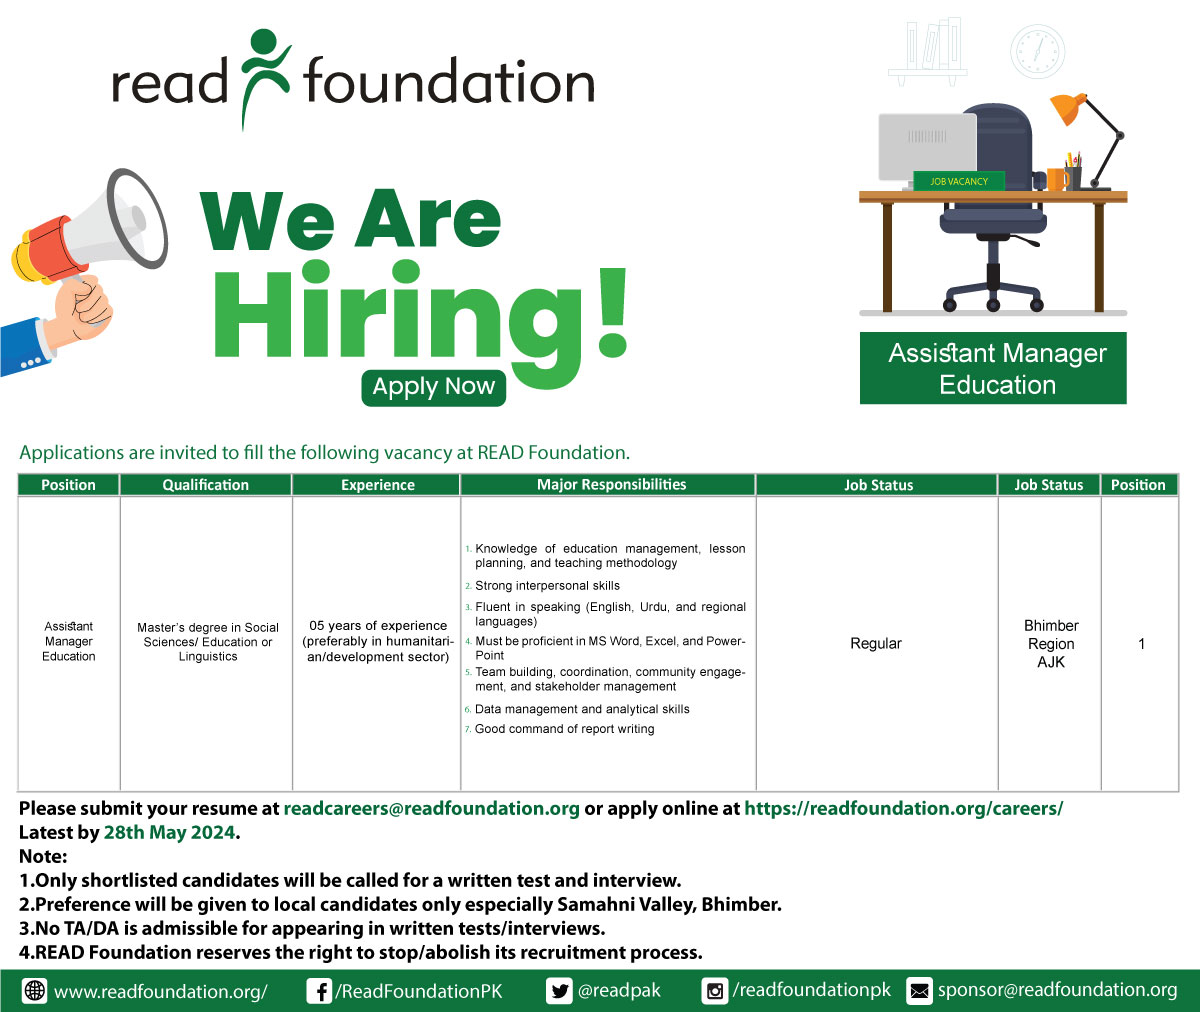 Job Alert!!! Join our dynamic team and unlock your potential! We're hiring talented individuals who are passionate and ready to make a difference. Apply now and take the next step towards a fulfilling career. Please apply at the given link: readfoundation.org/careers/ (For any